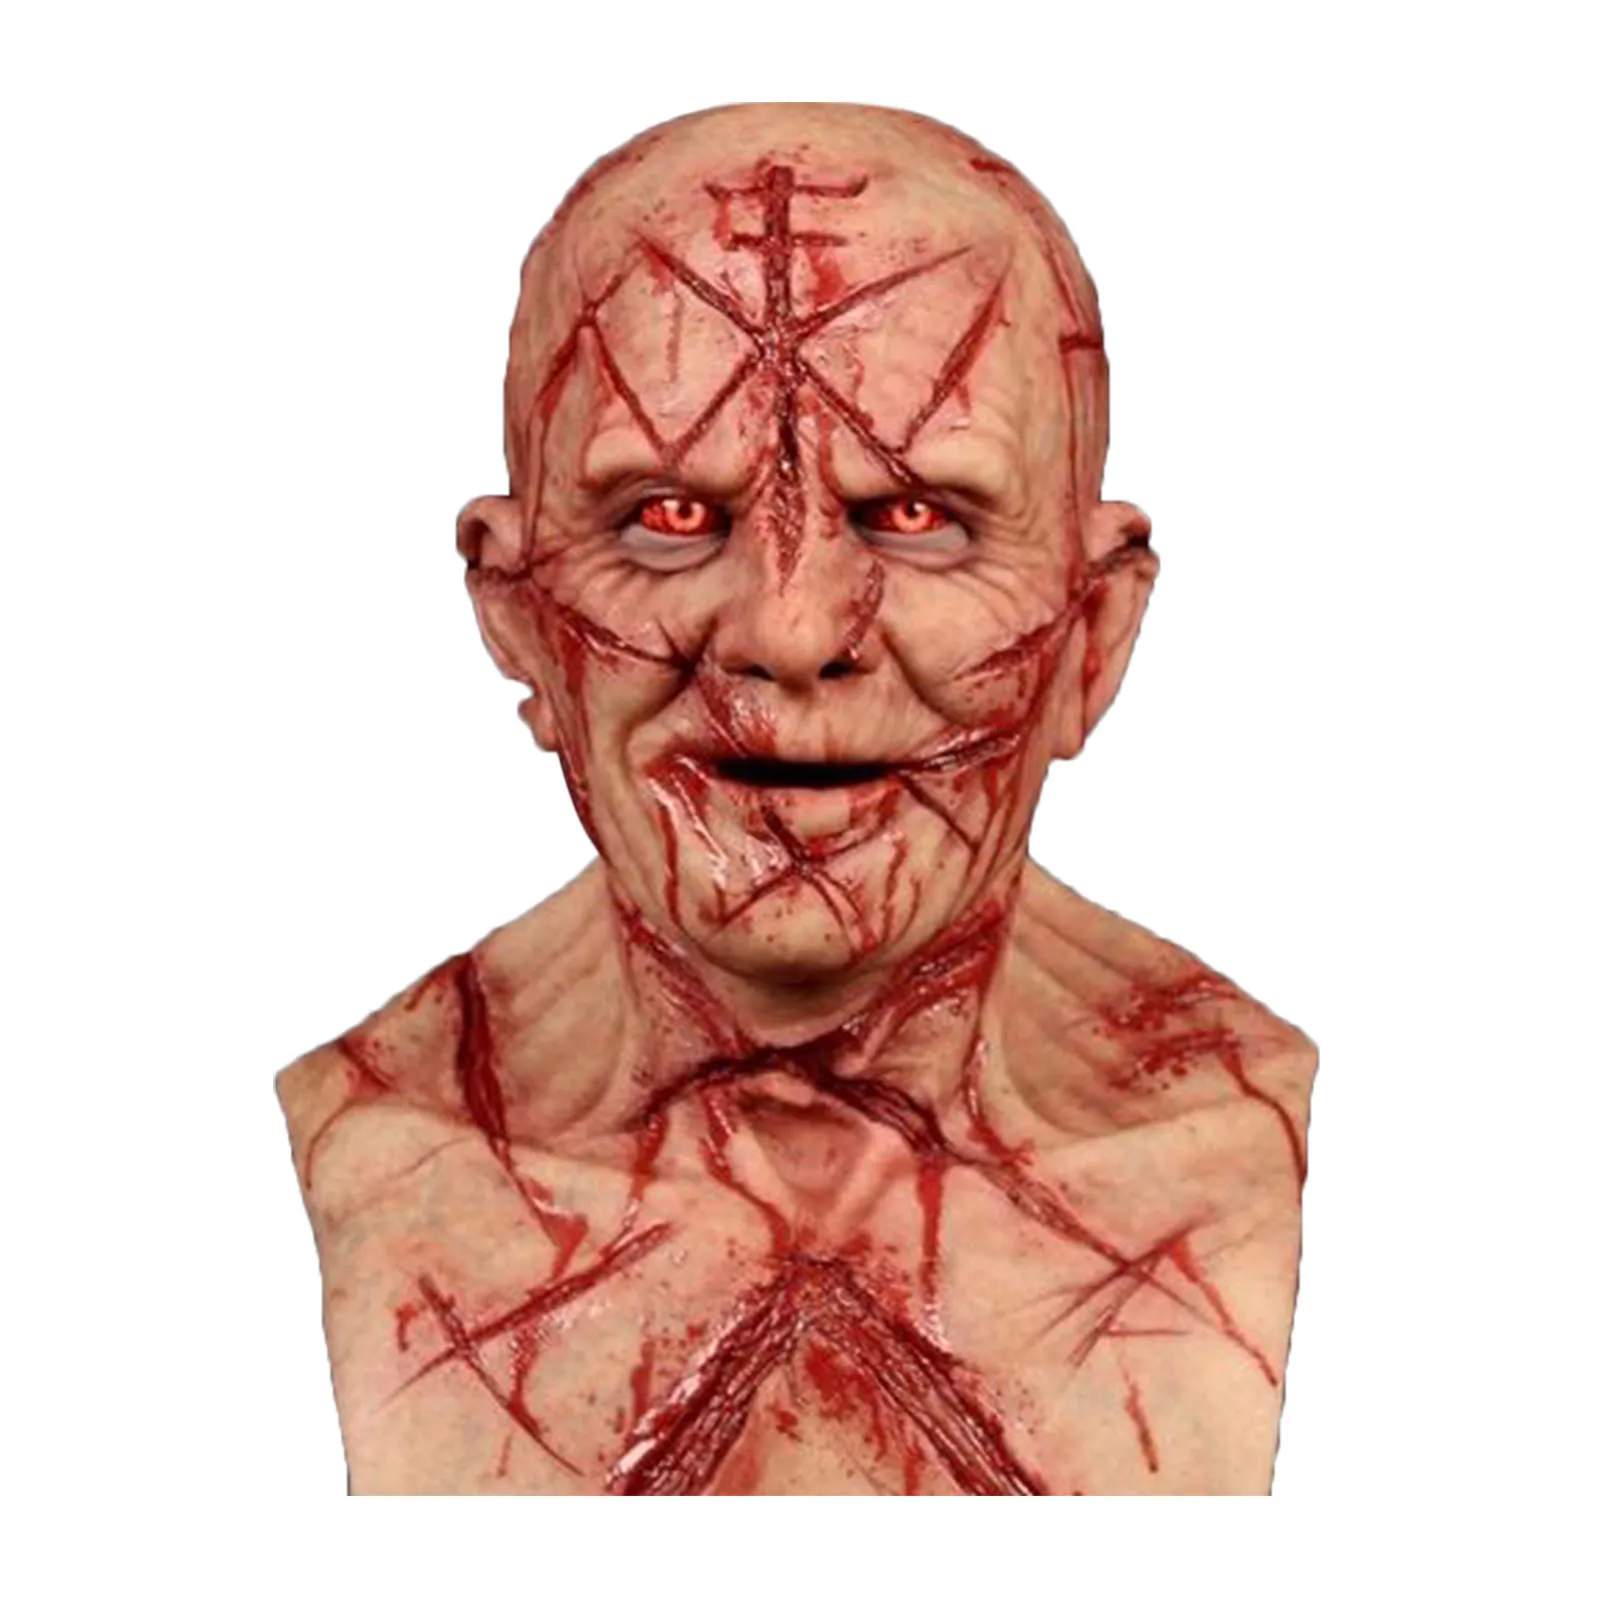 

Scary Bald Blood Scar Mask Horror Bloody Headgear 3d Realistic Human Face Headgear Emulsion Latex Adults Mask Breathable Masque